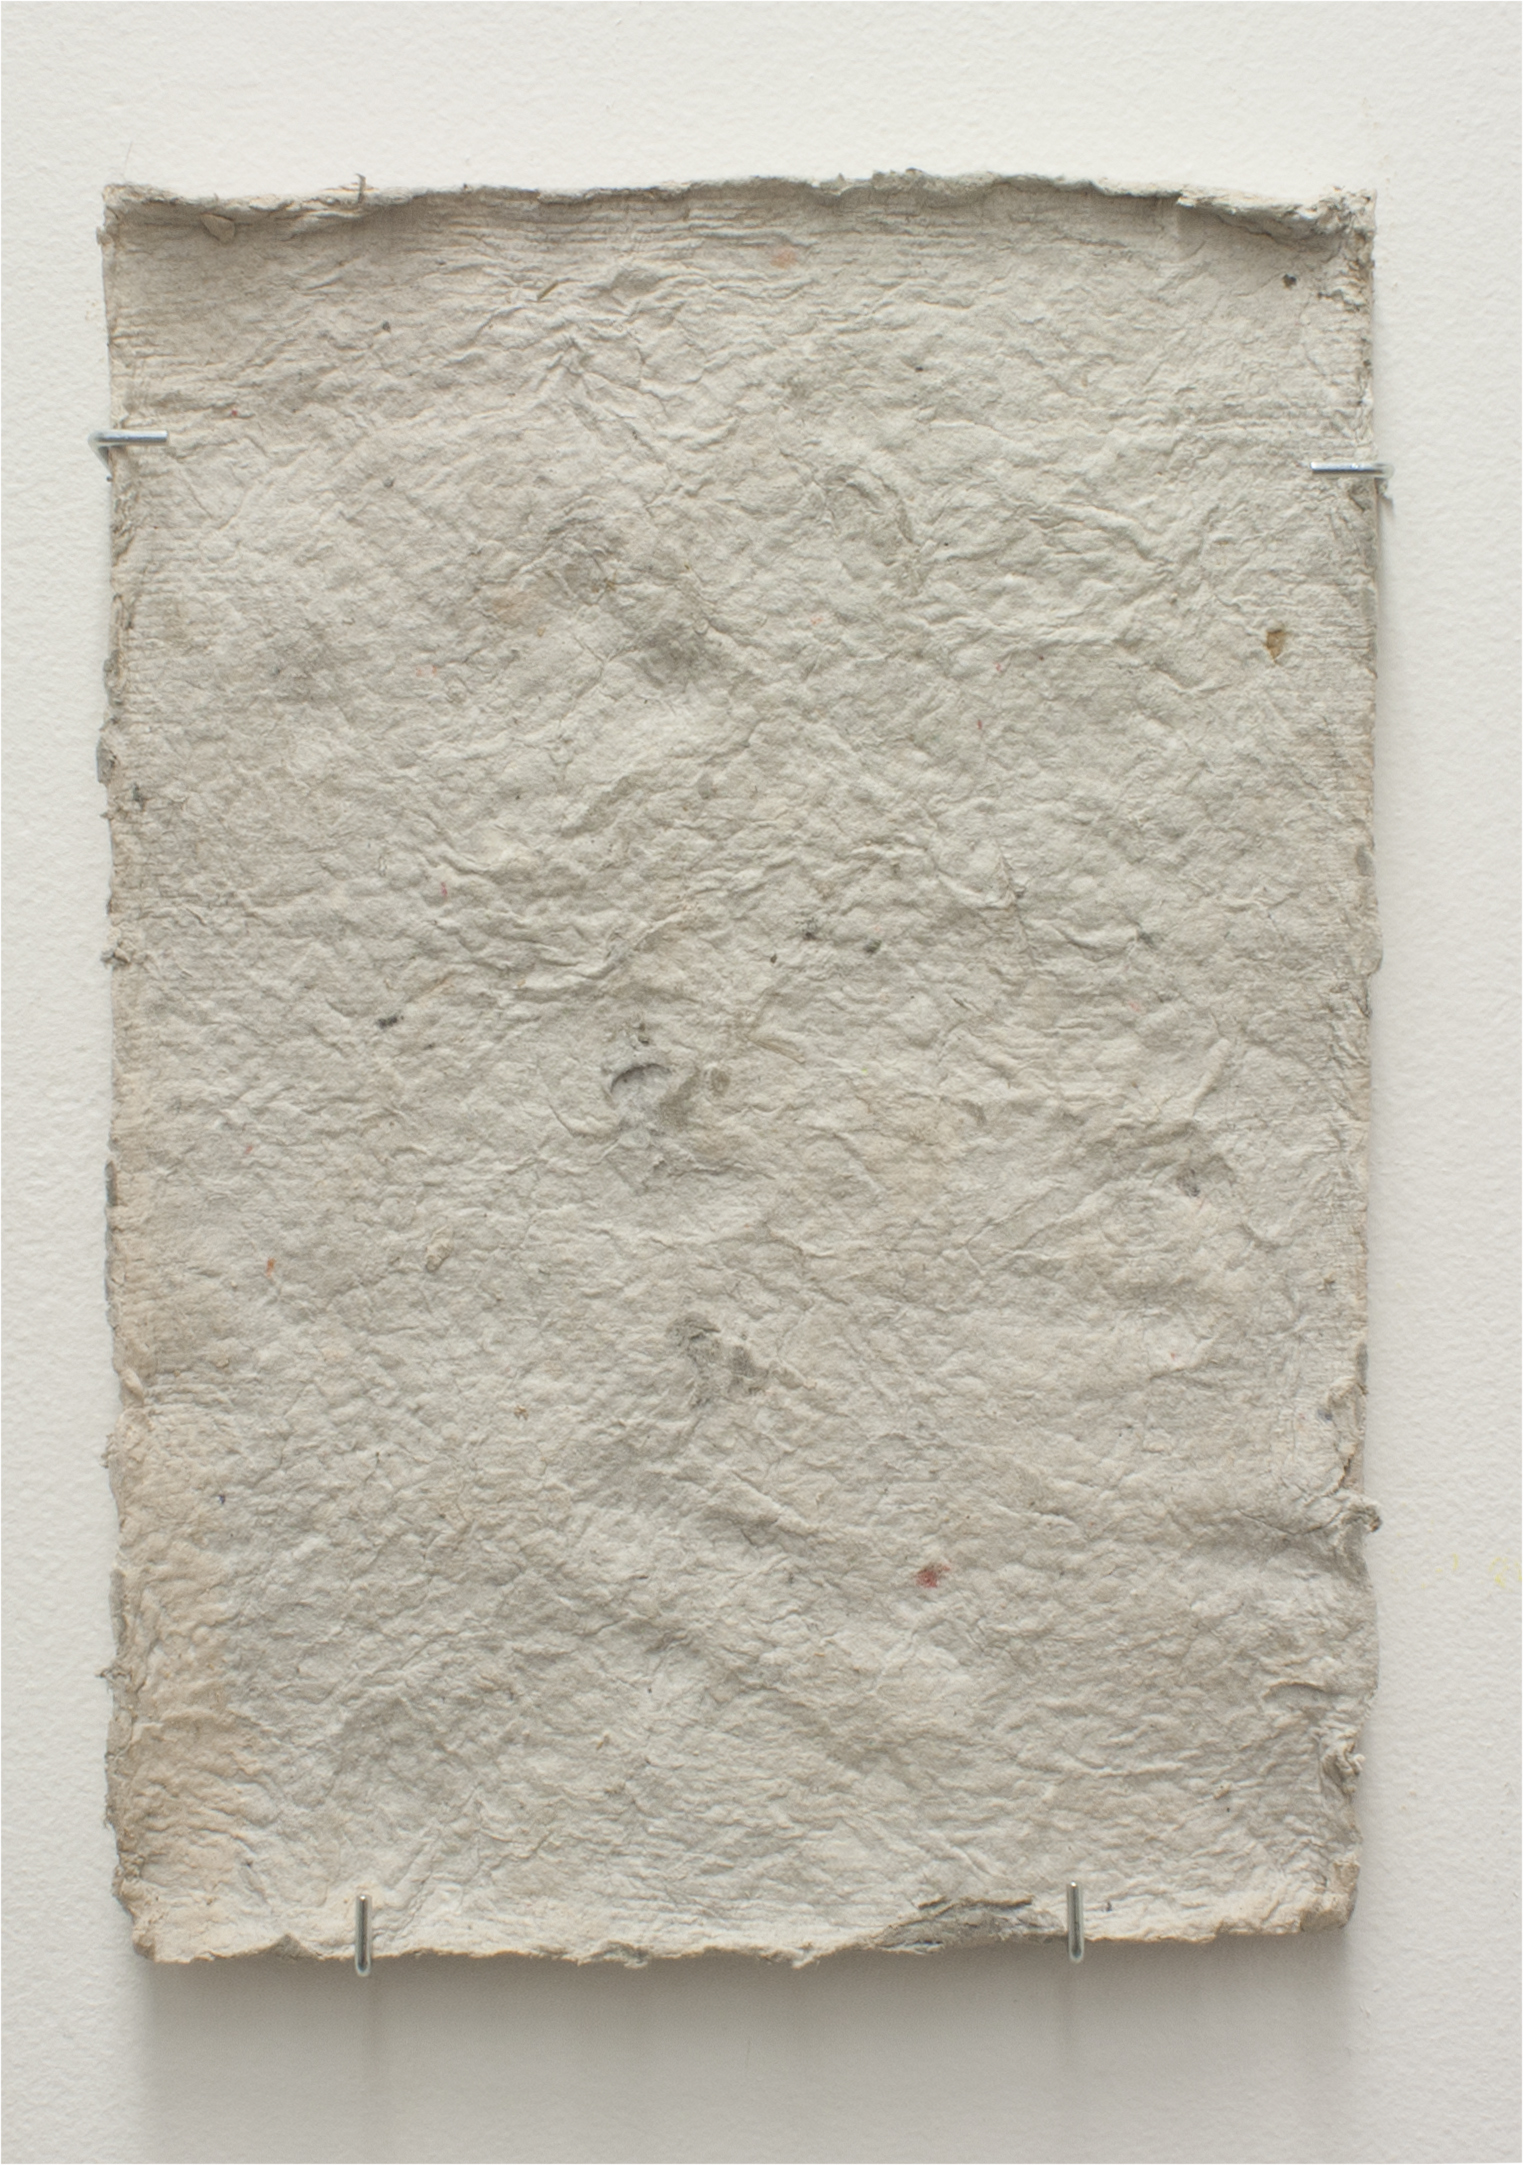   unfurled    Plaster, Detritus Paper, Leaves, and Unfired Clay   48" x 11" x 1"  2016 